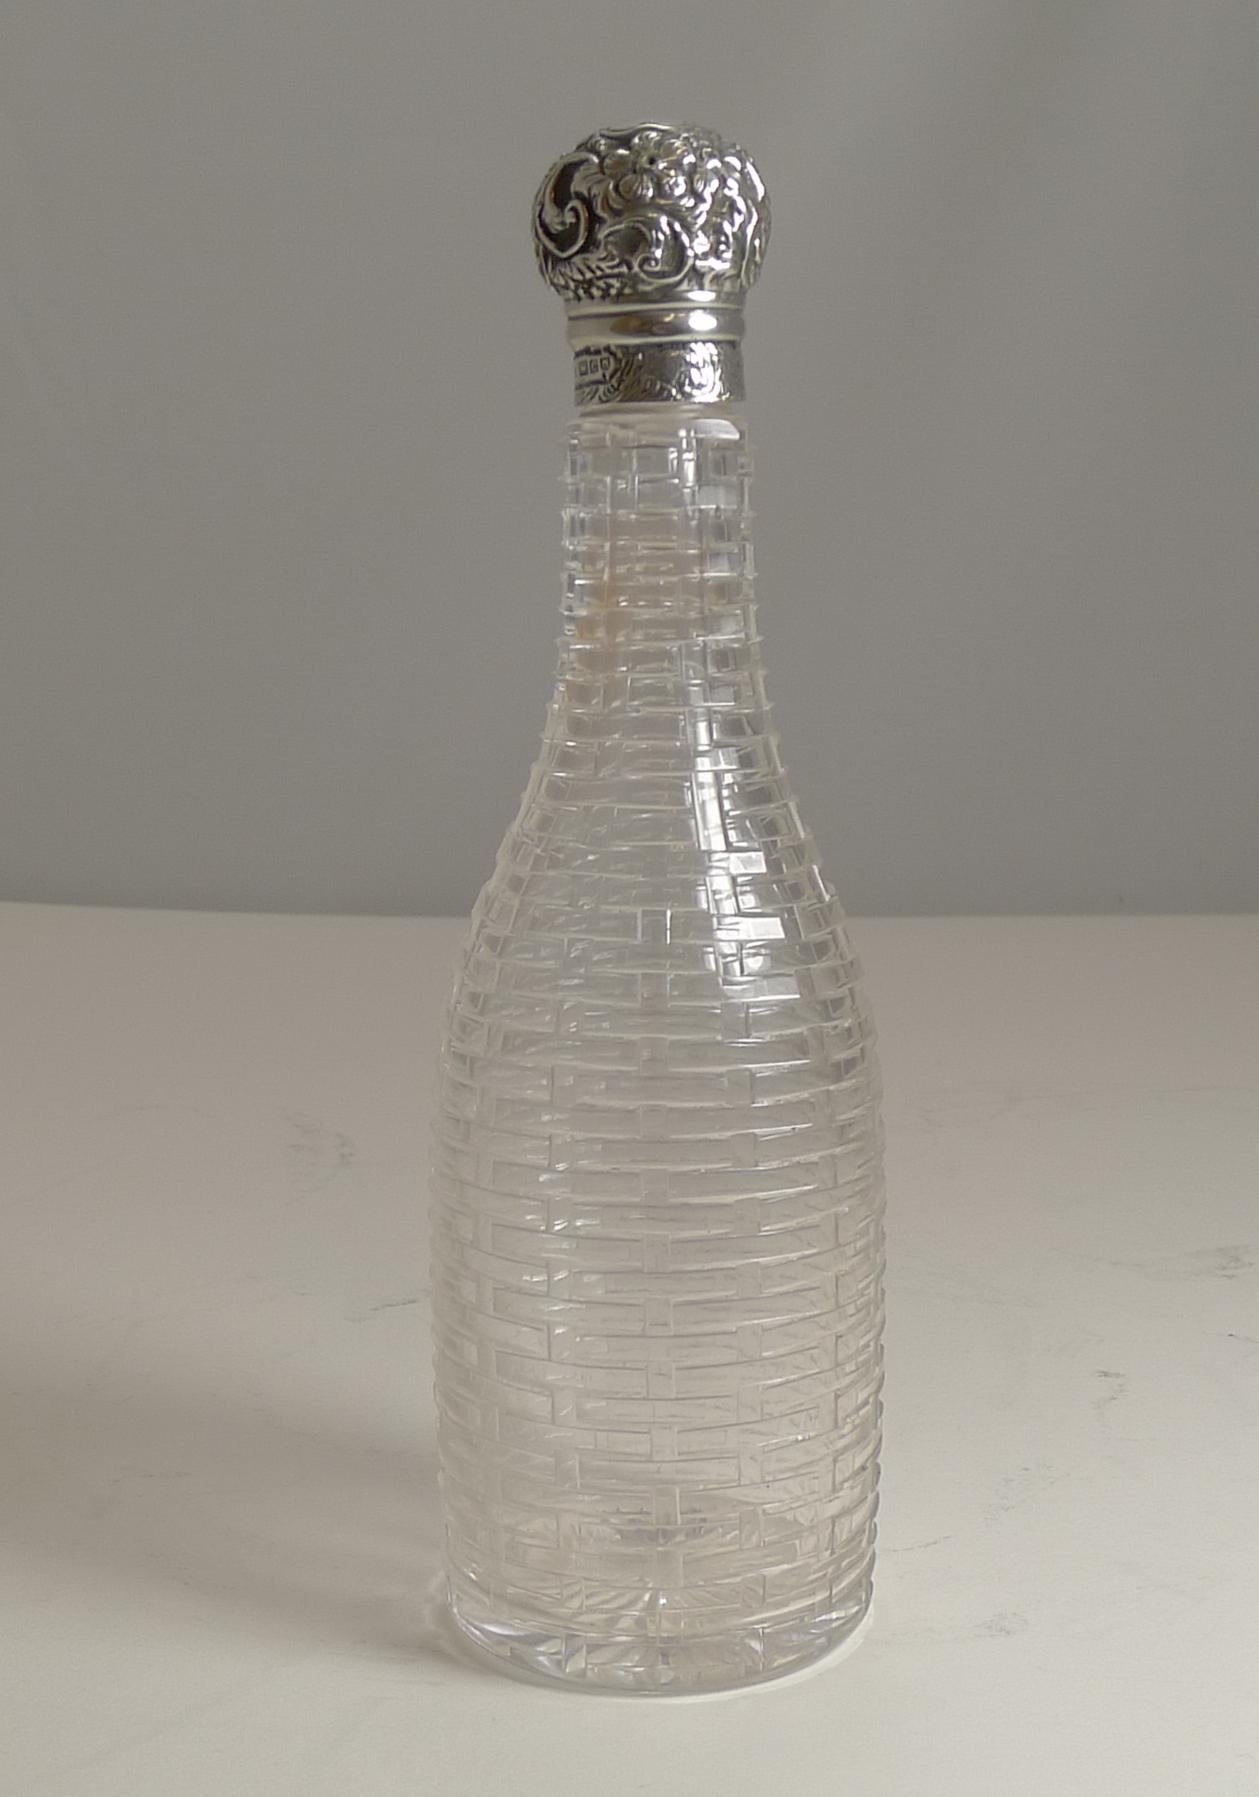 A Wonderful and most unusual miniature Champagne / wine / liquor bottle made from English crystal and handcut to resemble basket weave, outstanding work and without damage.

The sterling silver top is fully hallmarked for London 1898, so a true